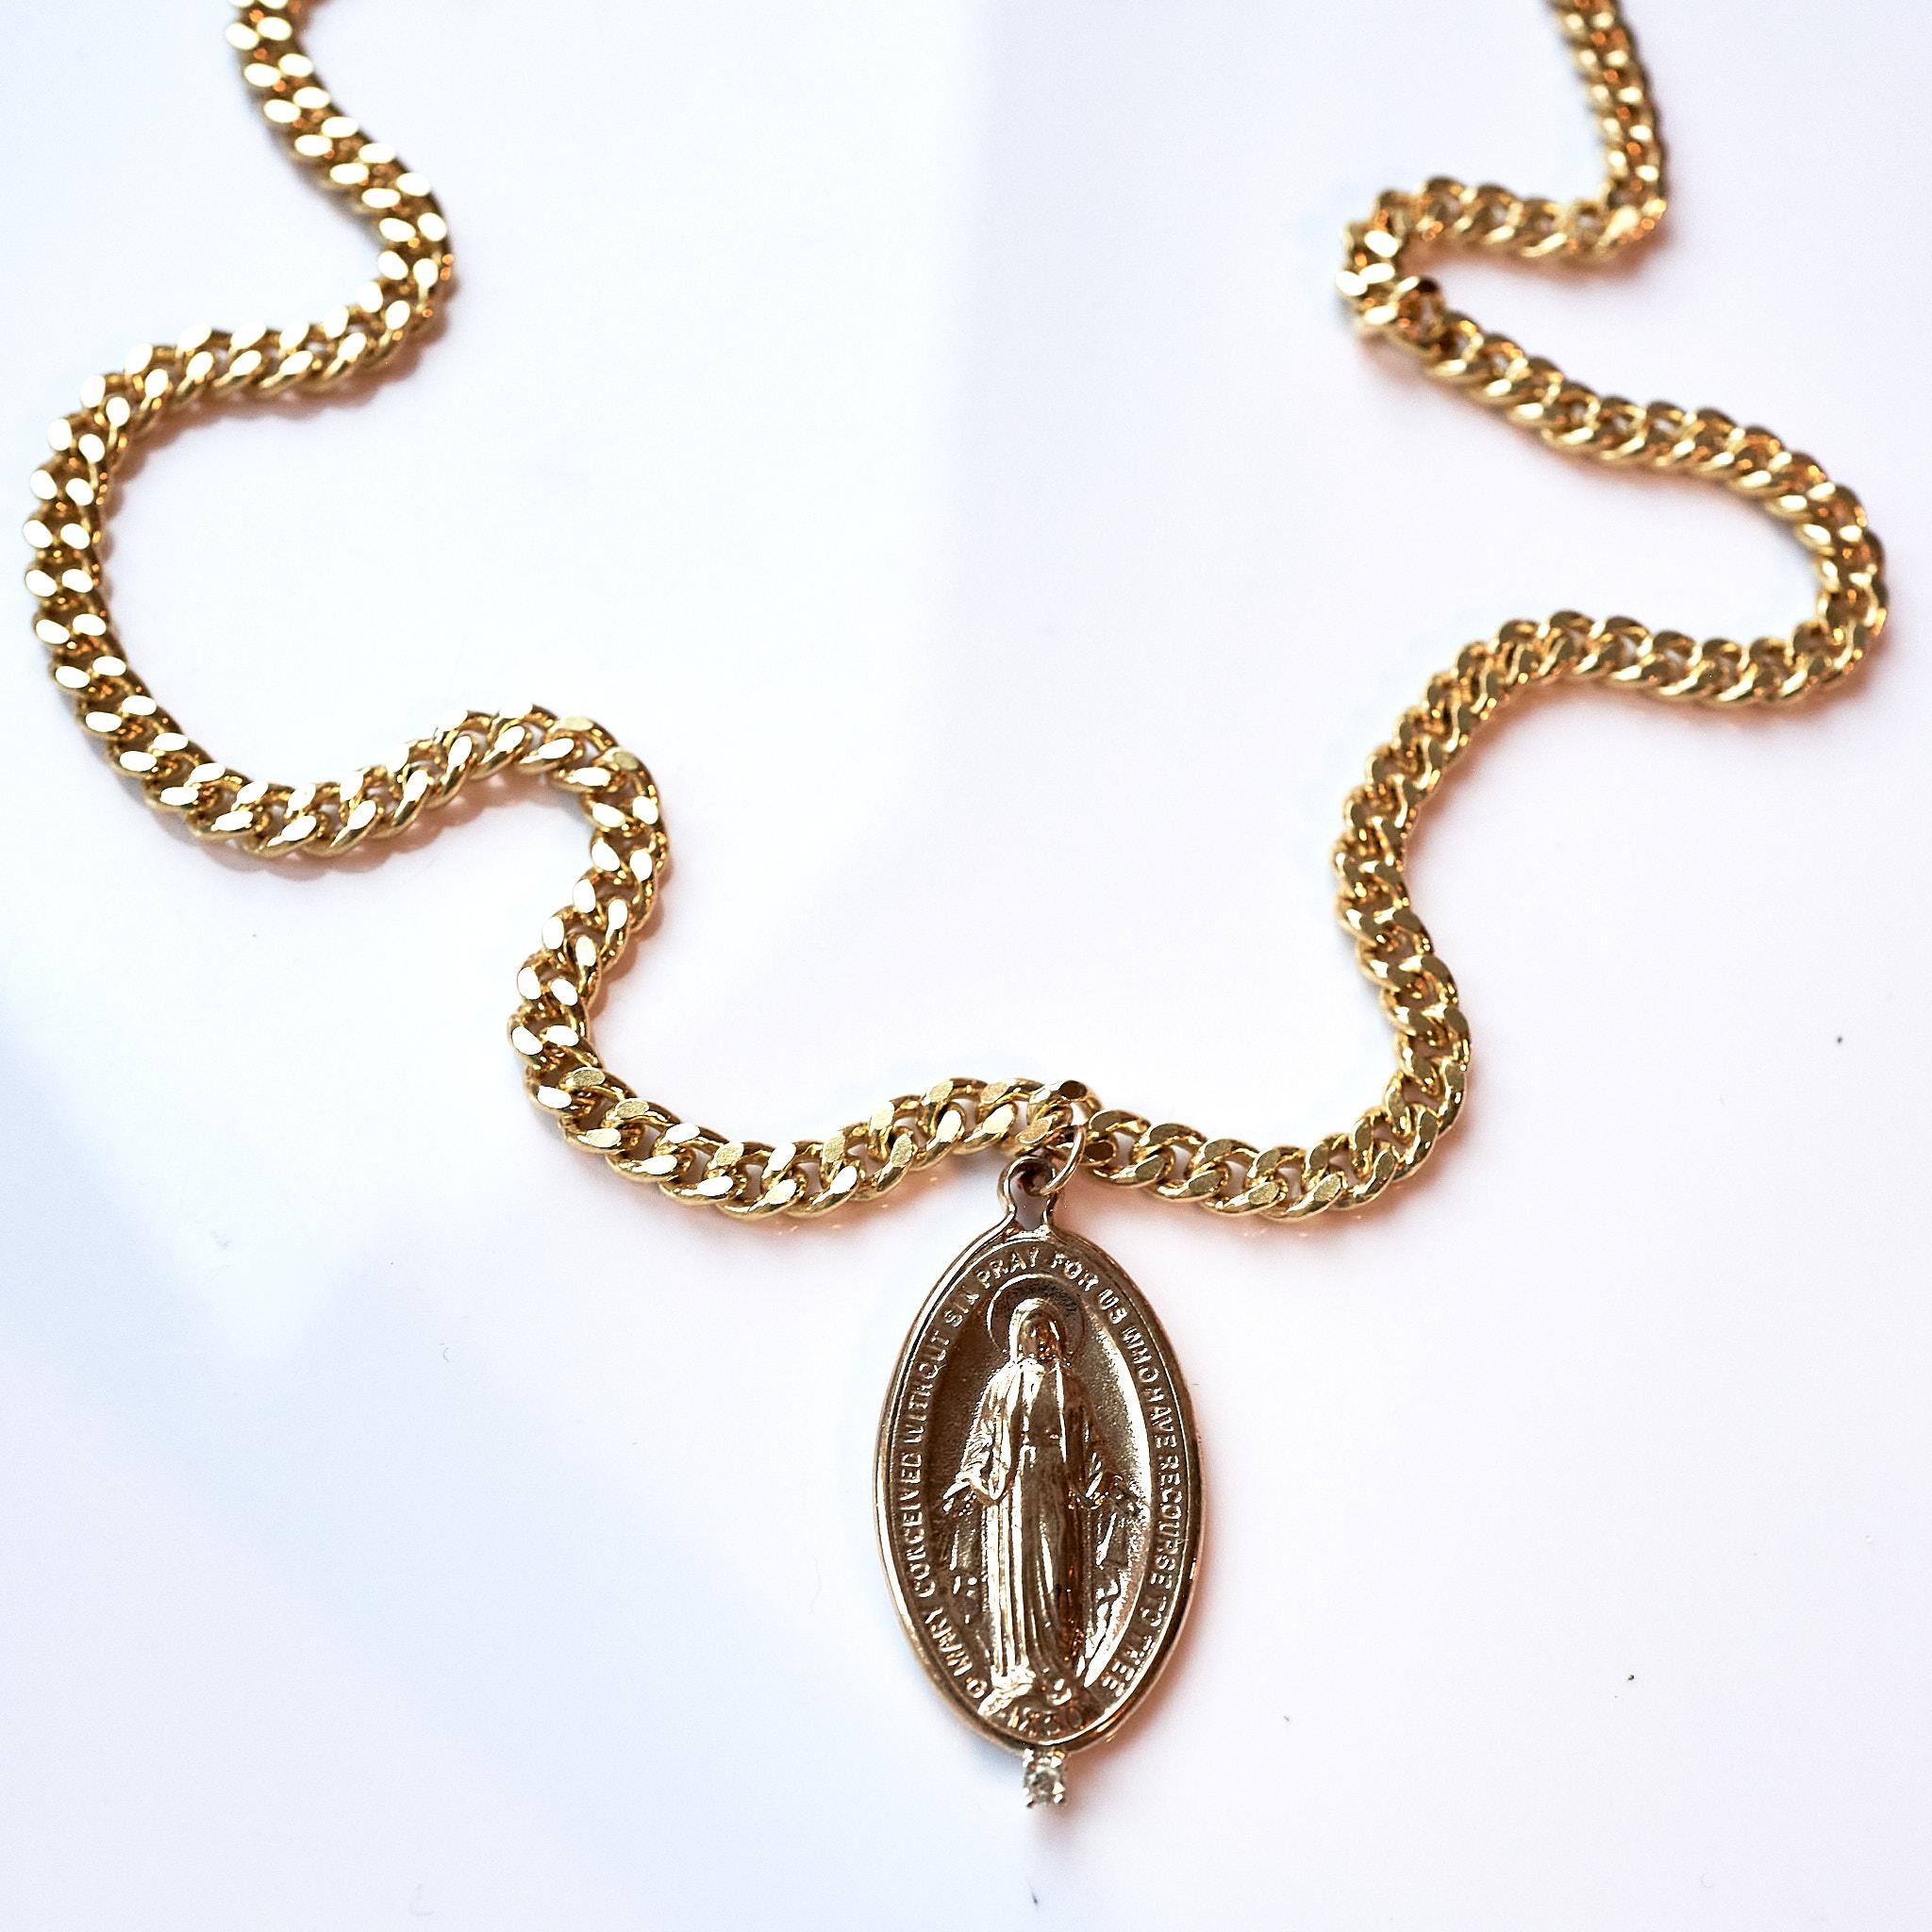 White Medal Virgin Mary Oval Medal Chain Necklace J Dauphin For Sale 2